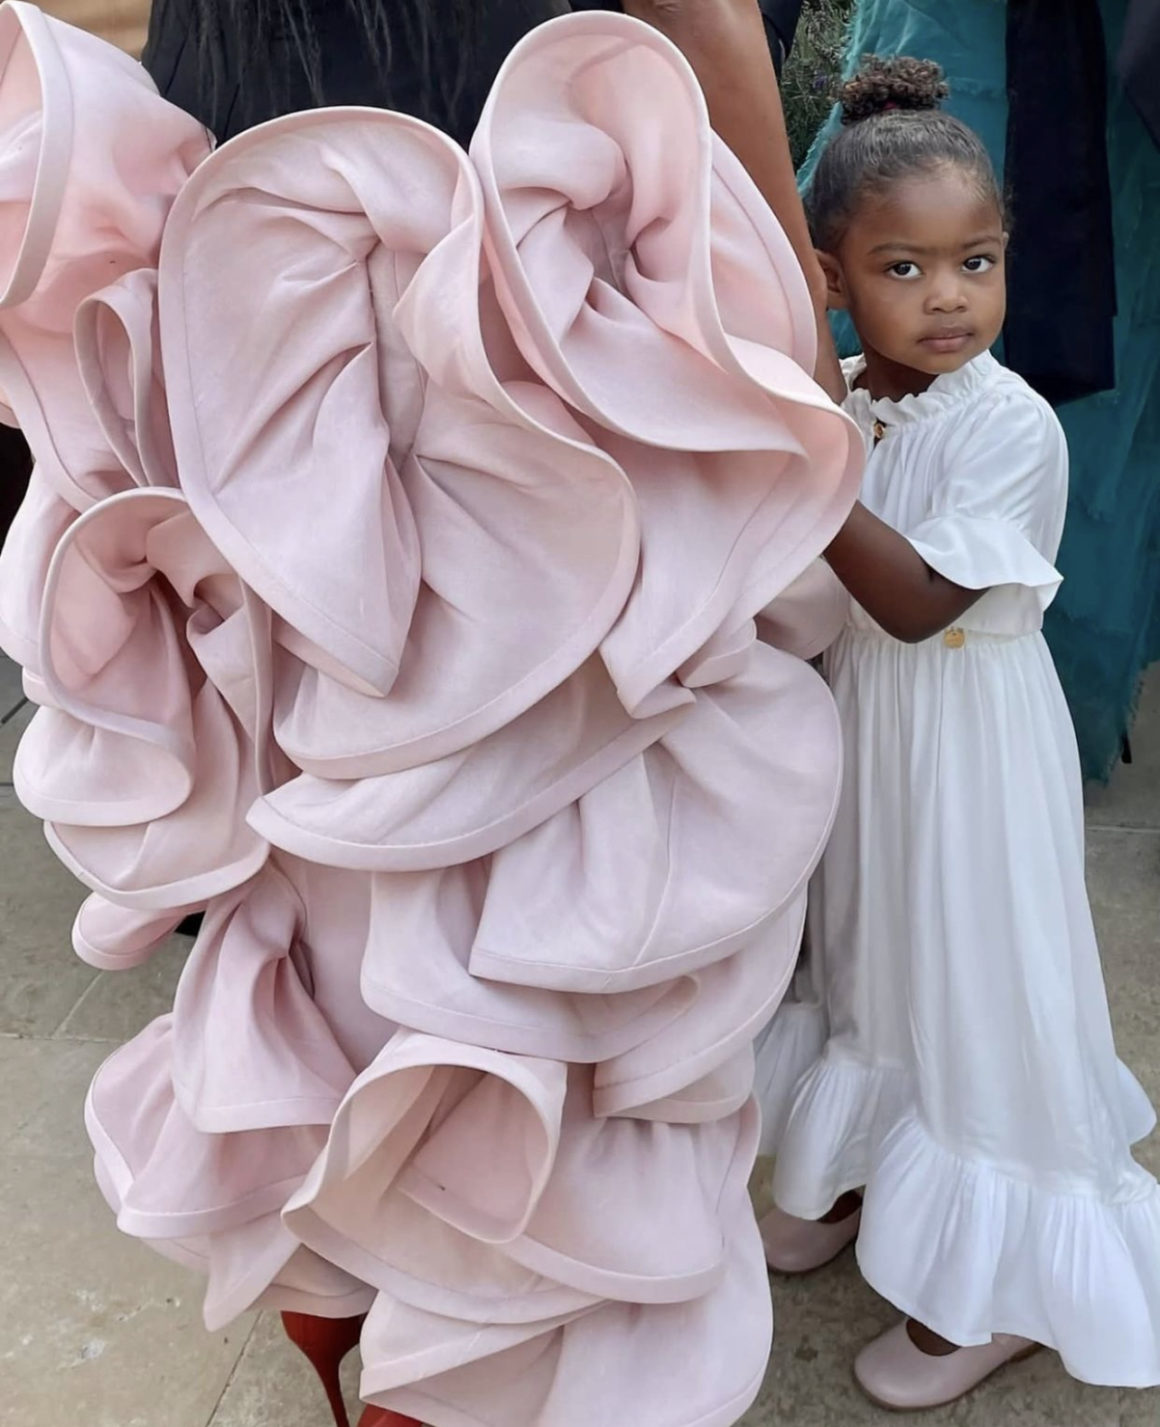 Kaavia James Shows Us Shes a Fashionista in the Making Wearing Lanvin White Ruffled Dress and Pink Ballet Flats at Parents Gabrielle Union and Dwyane Wades Anniversary Celebration in Paris3